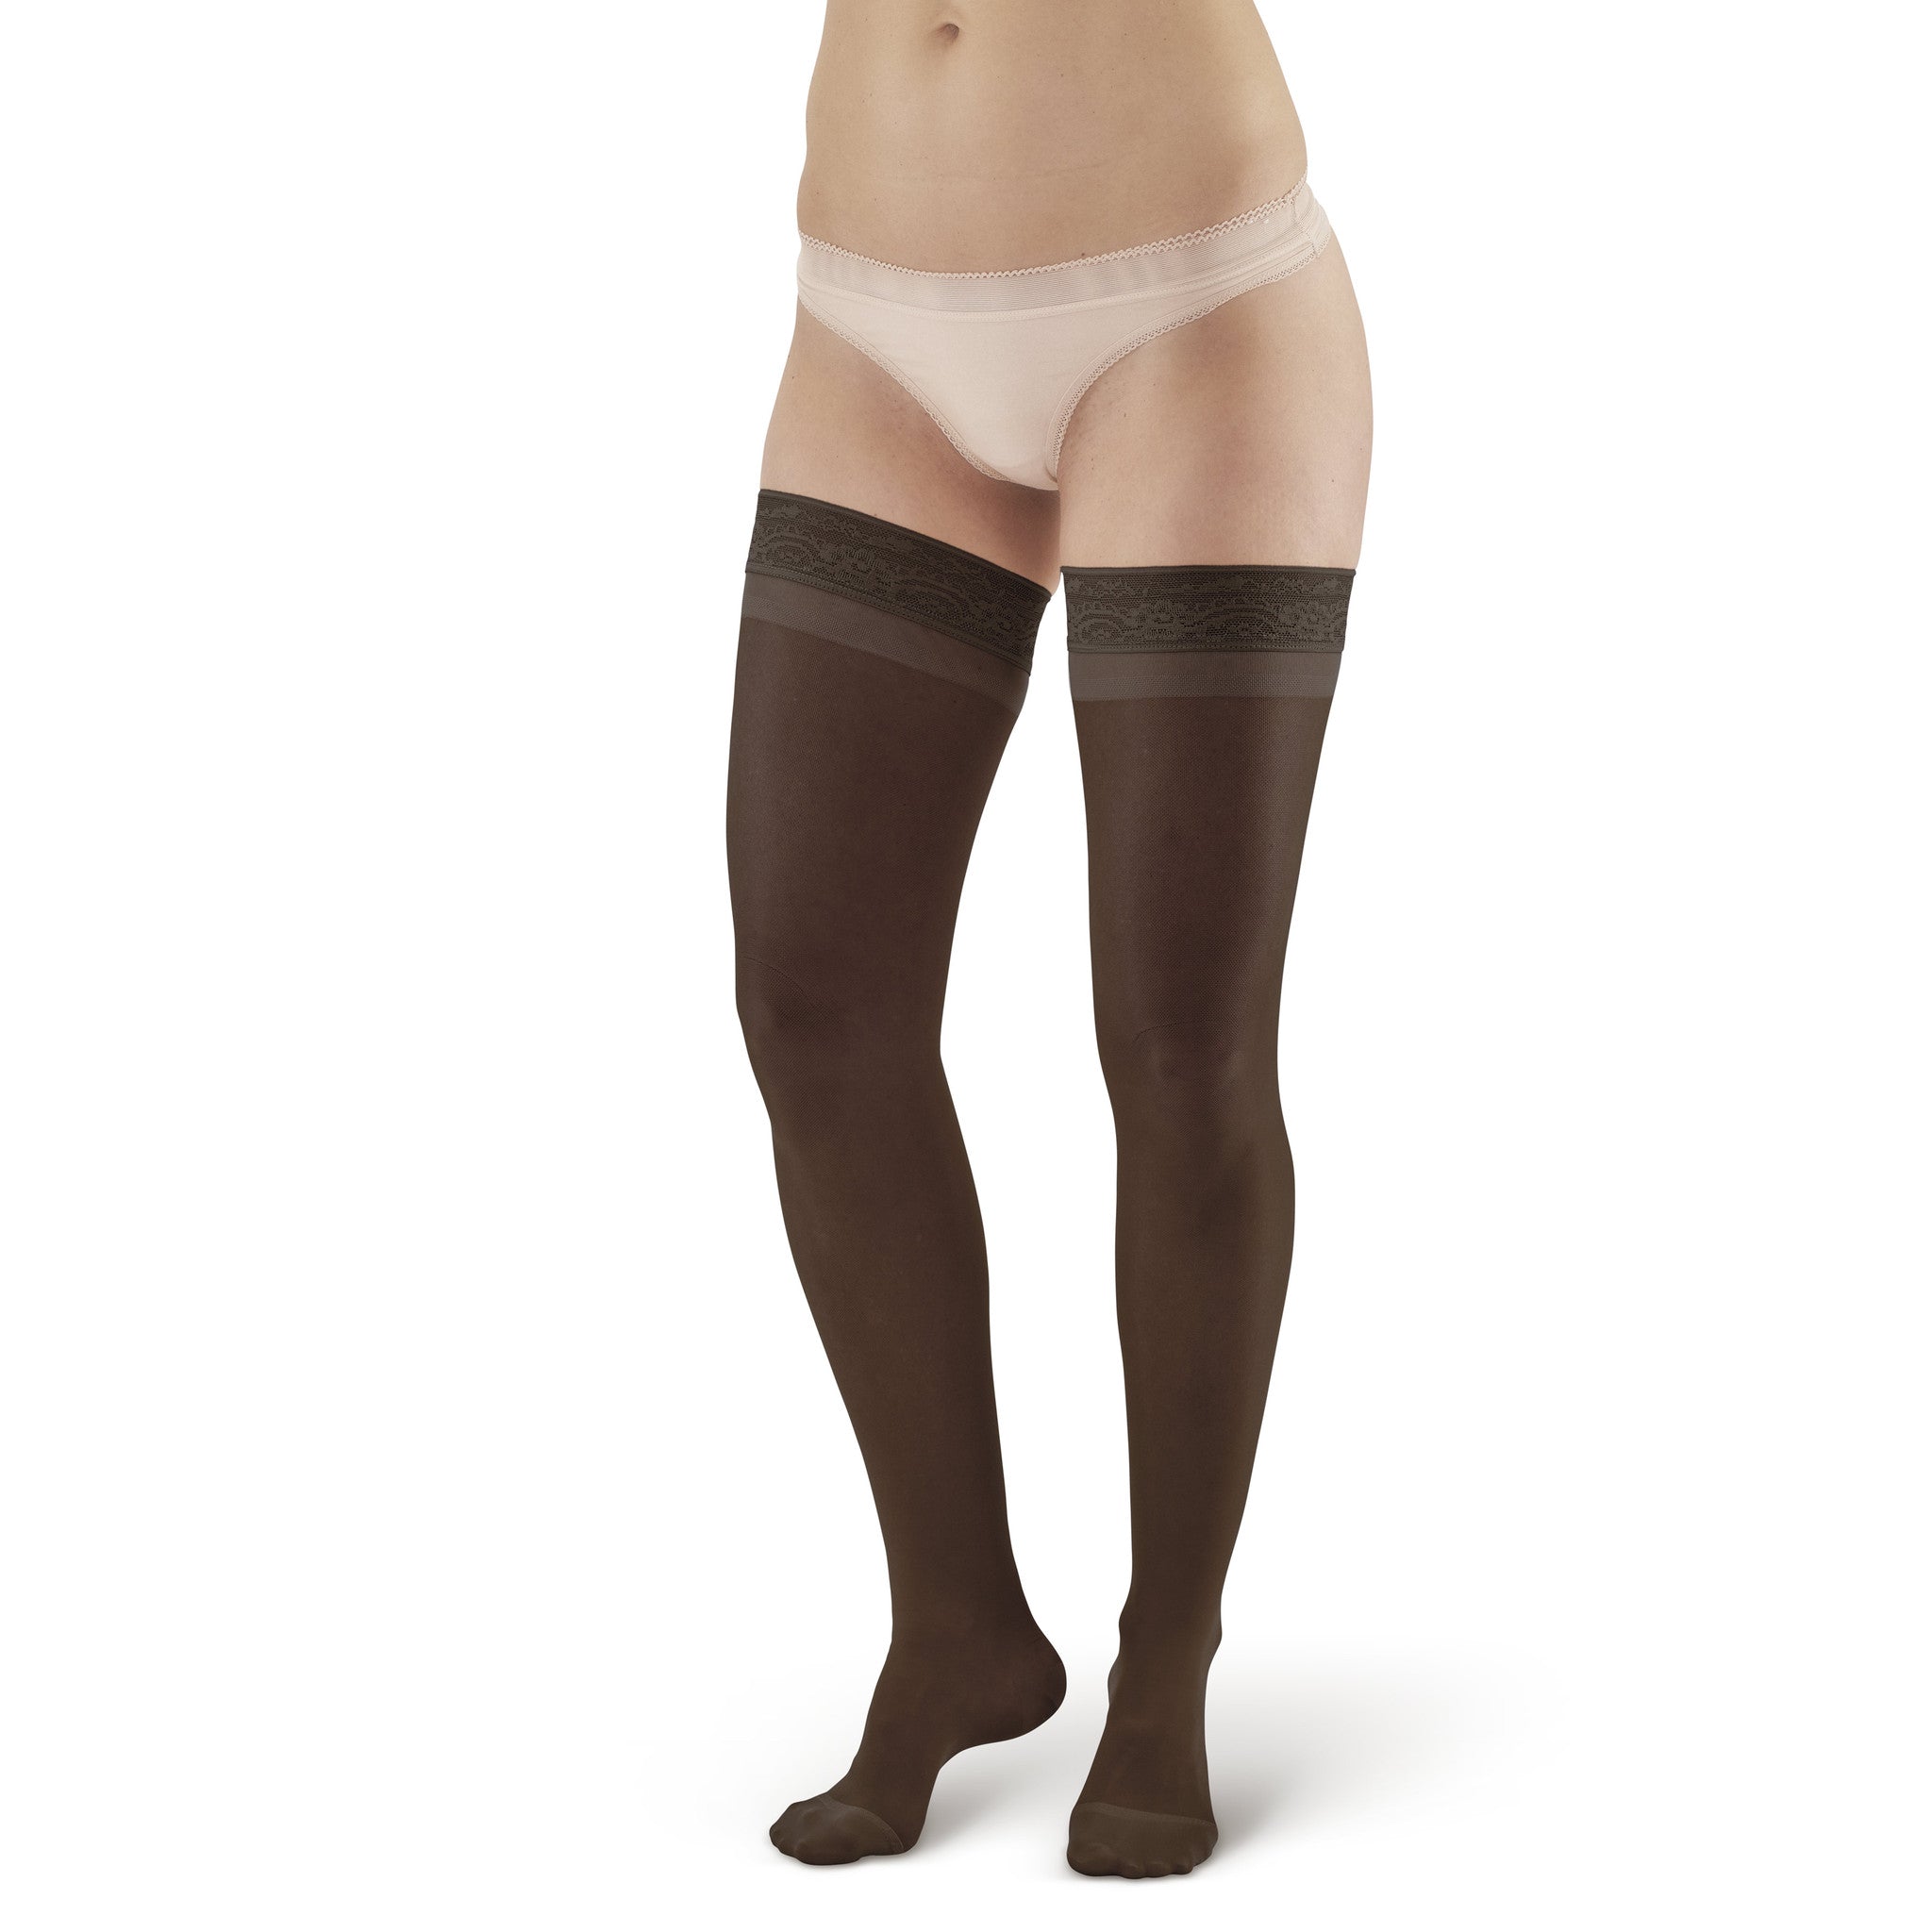 AW Style 8 Sheer Support Closed Toe Thigh Highs w/Top Band - 20-30